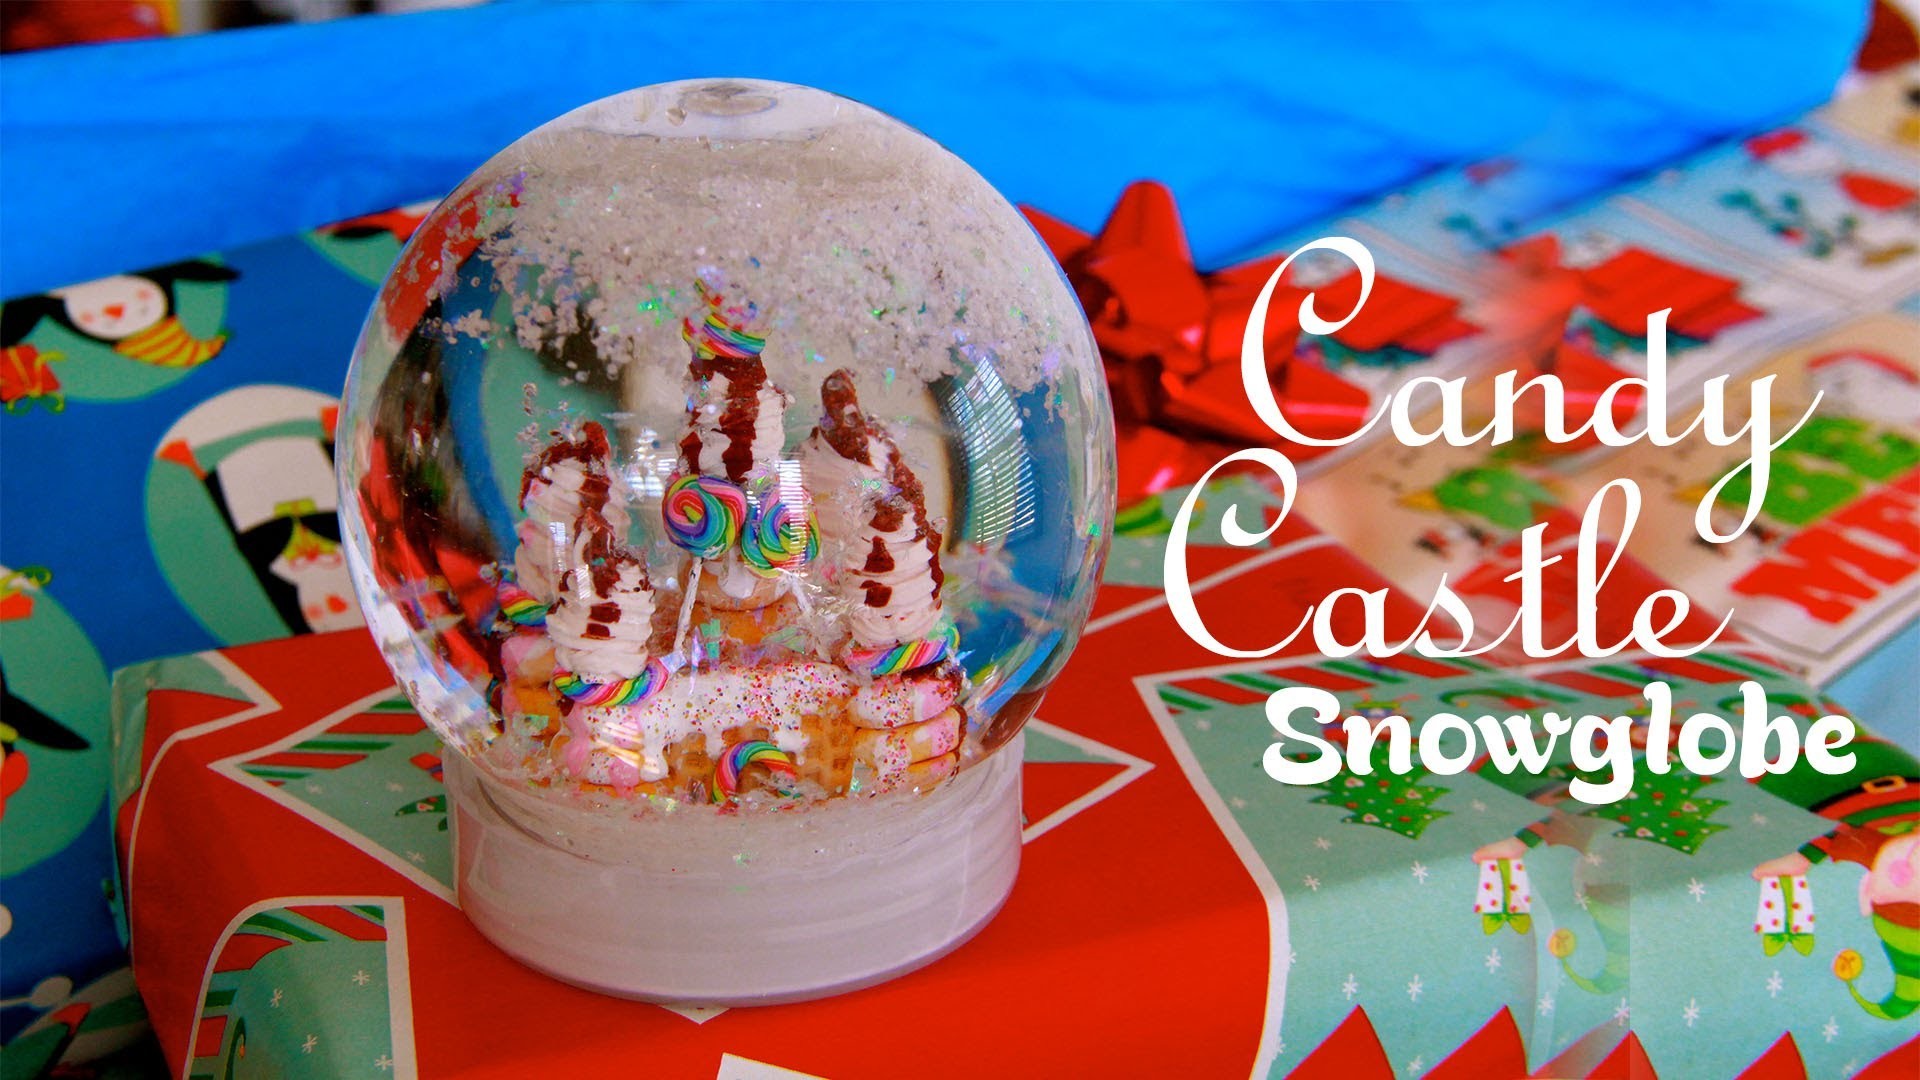 1920x1080 Candy Castle - How To Make A Miniature Gingerbread House Snow Globe - DIY -  YouTube